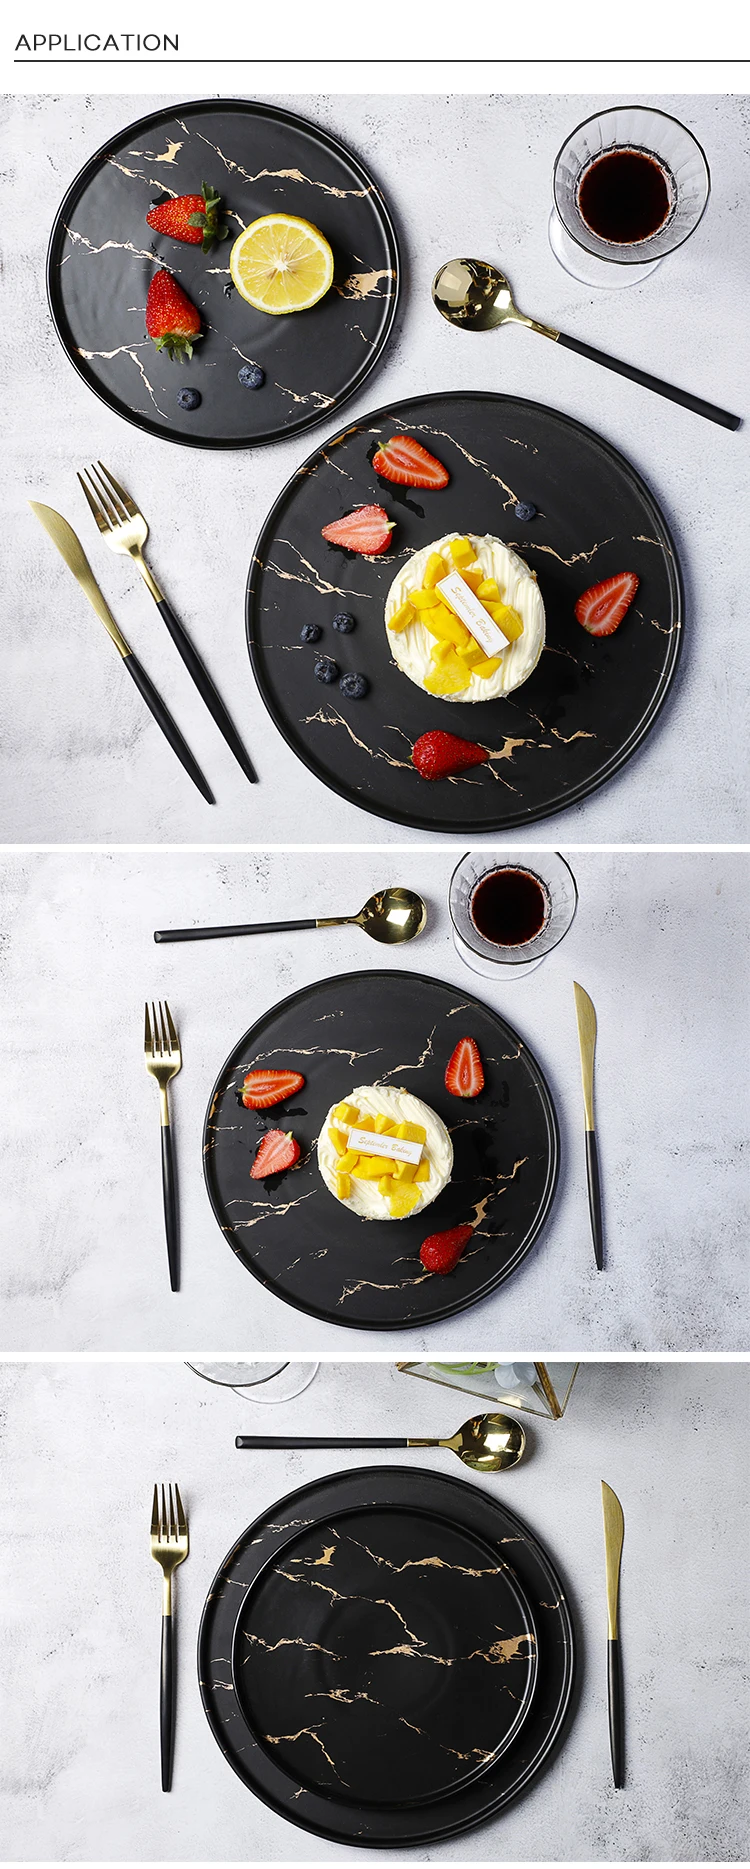 Trending Products Two Eight Black &Gold Decal Dinnerware Sets 8.5/10.5 Inch Marble Plates, Marble Ceramic Plates&